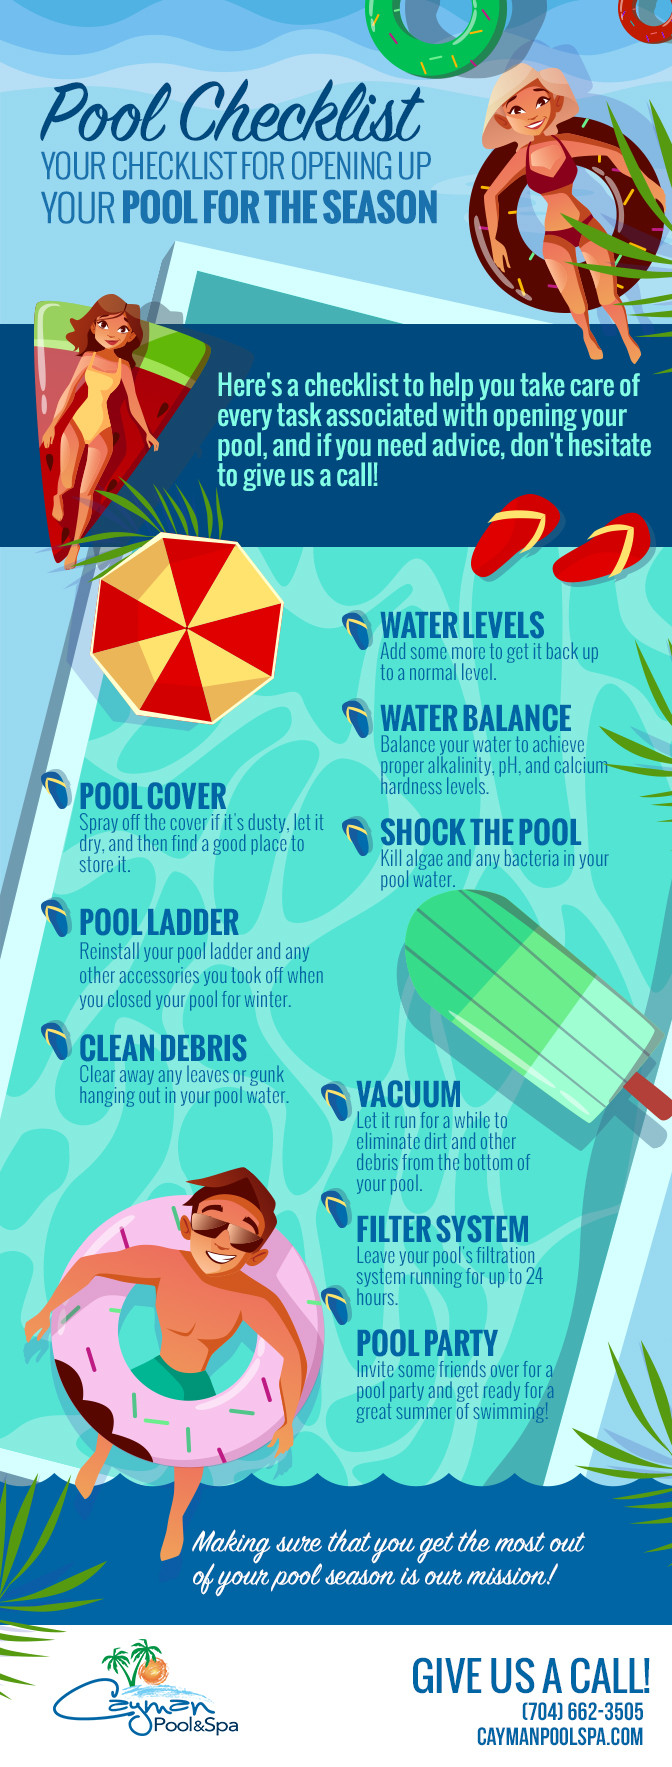 Pool checklist your checklist for opening up your pool for the season